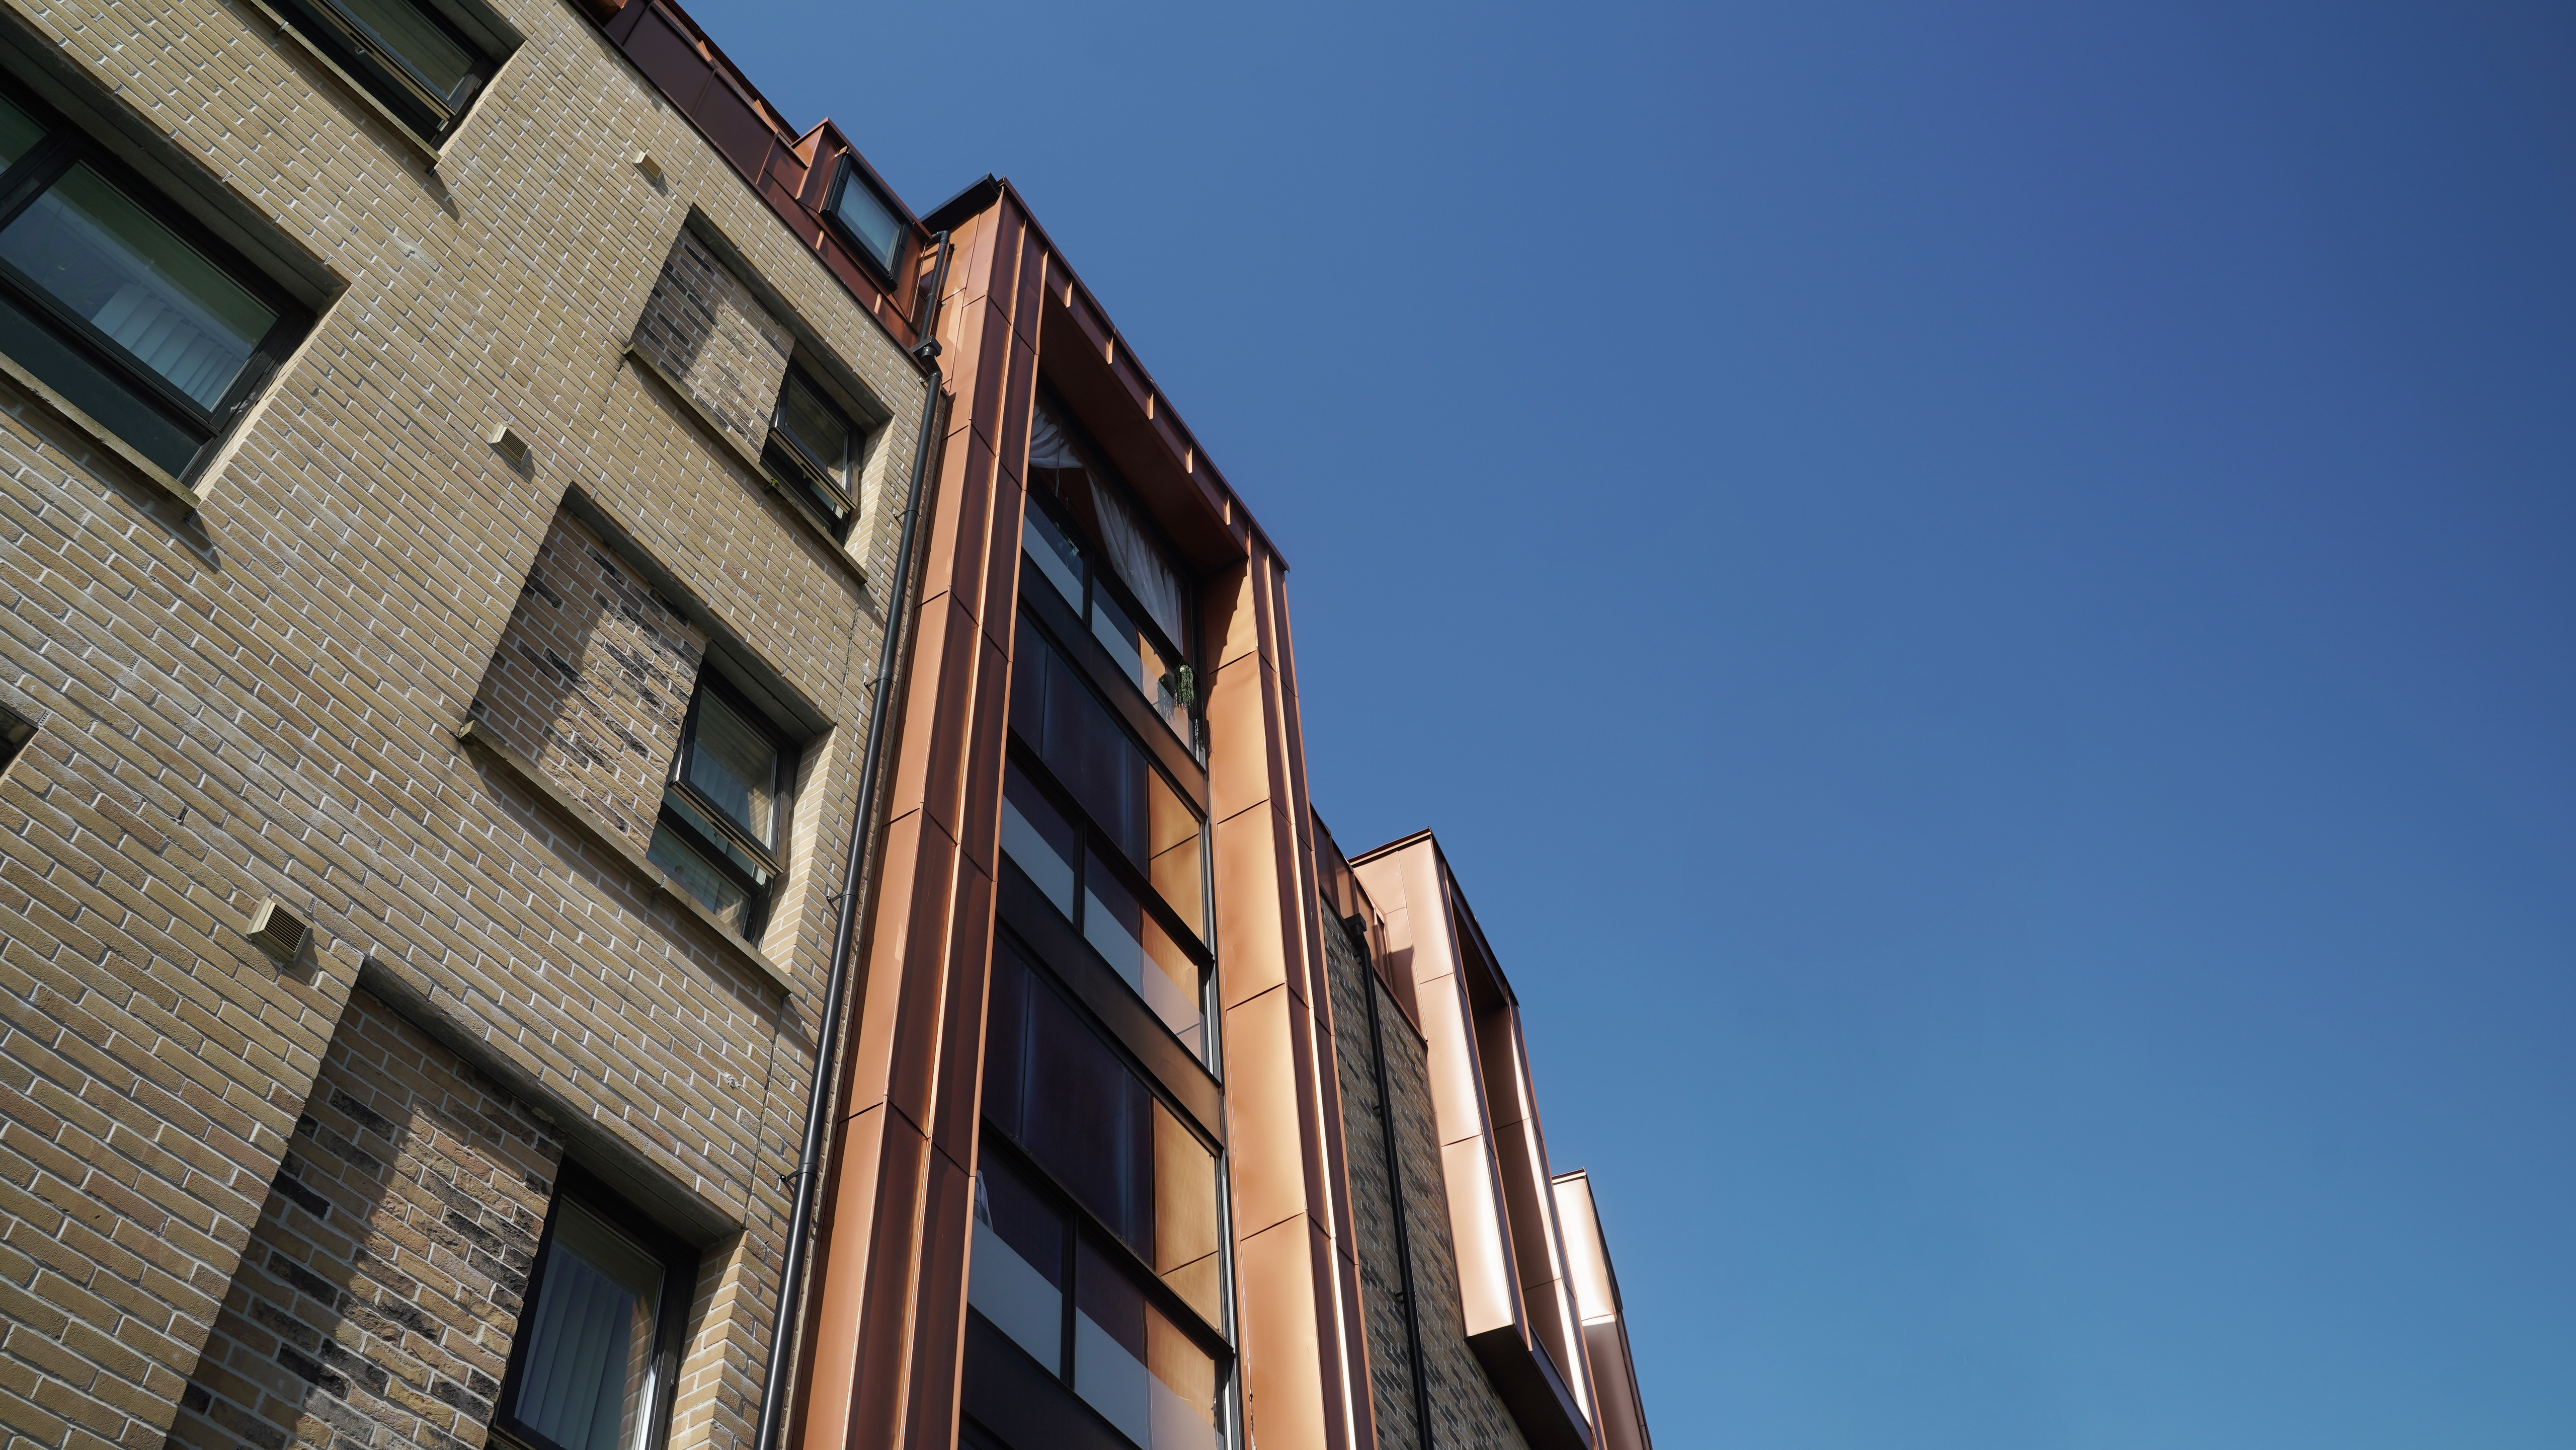 Perspective view of the façade of a modern residential development on Nethan Street in Glasgow, clad with FALZONAL in New Copper. The metallic façade elements catch and reflect the light, emphasising the shape of the building and providing an impressive visual contrast to the traditional brick architecture. The PREFA aluminium product not only provides an appealing aesthetic, but also promises durability and low maintenance.